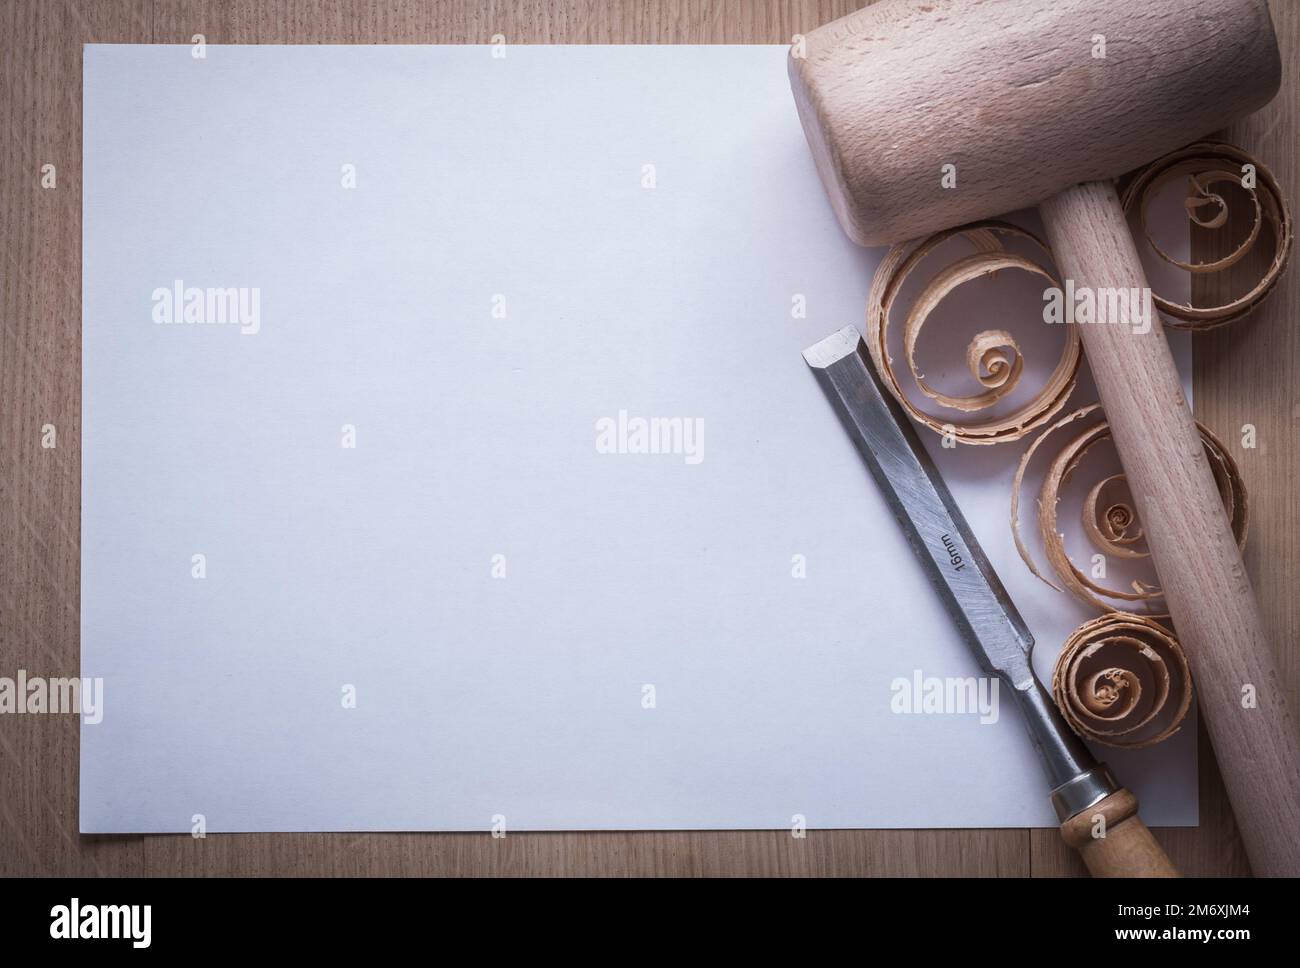 Curled shavings firmer chisels wooden mallet and blank sheet of paper on wood board copy space image construction concept. Stock Photo